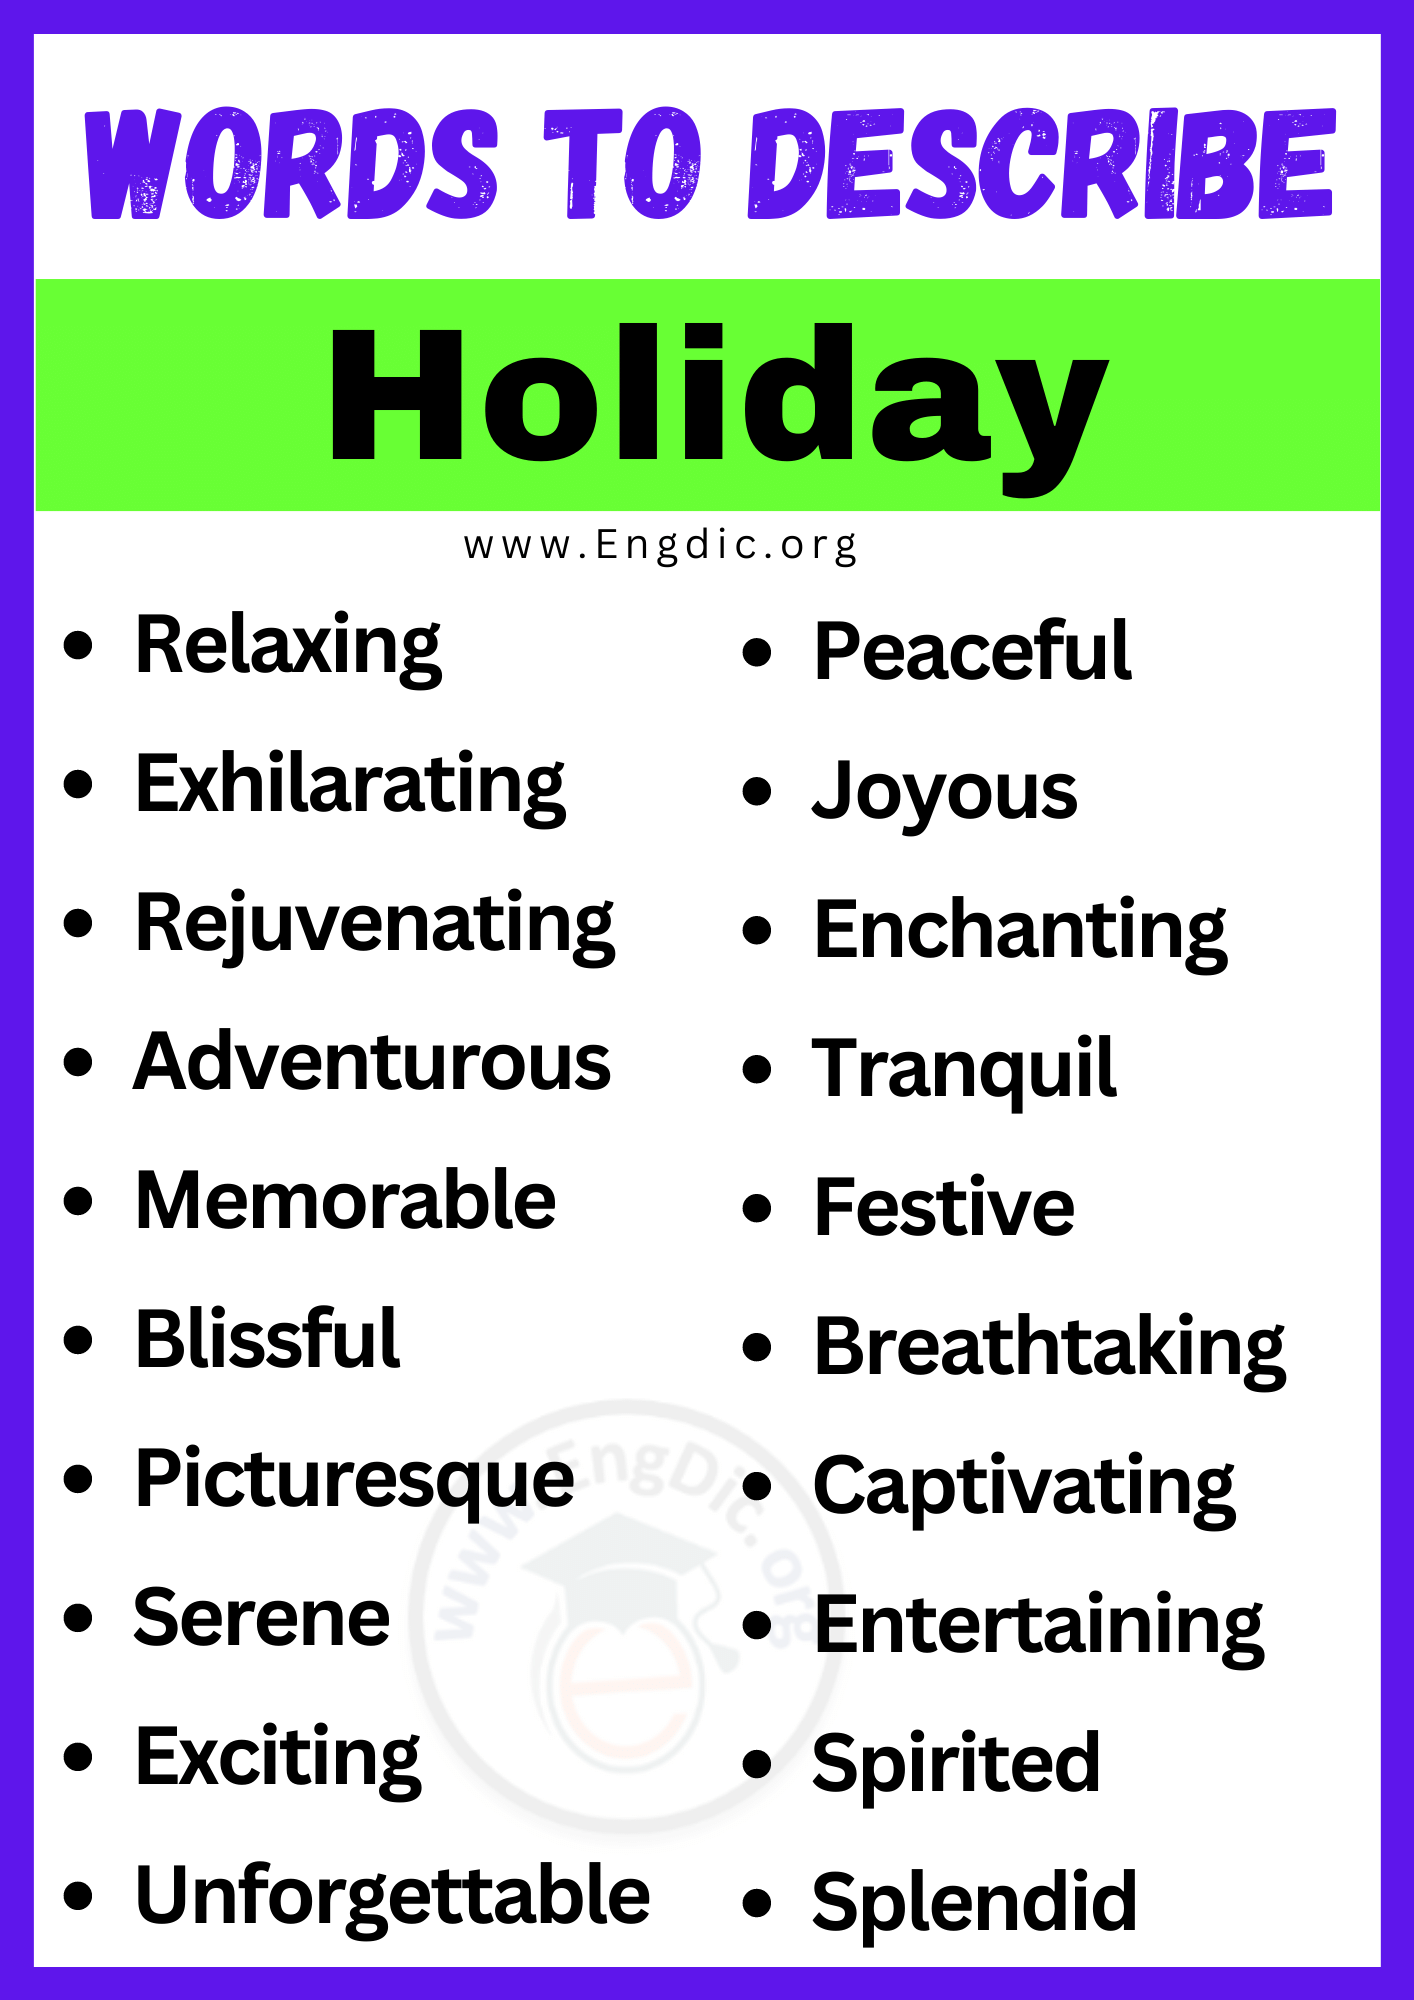 Words to Describe Holiday